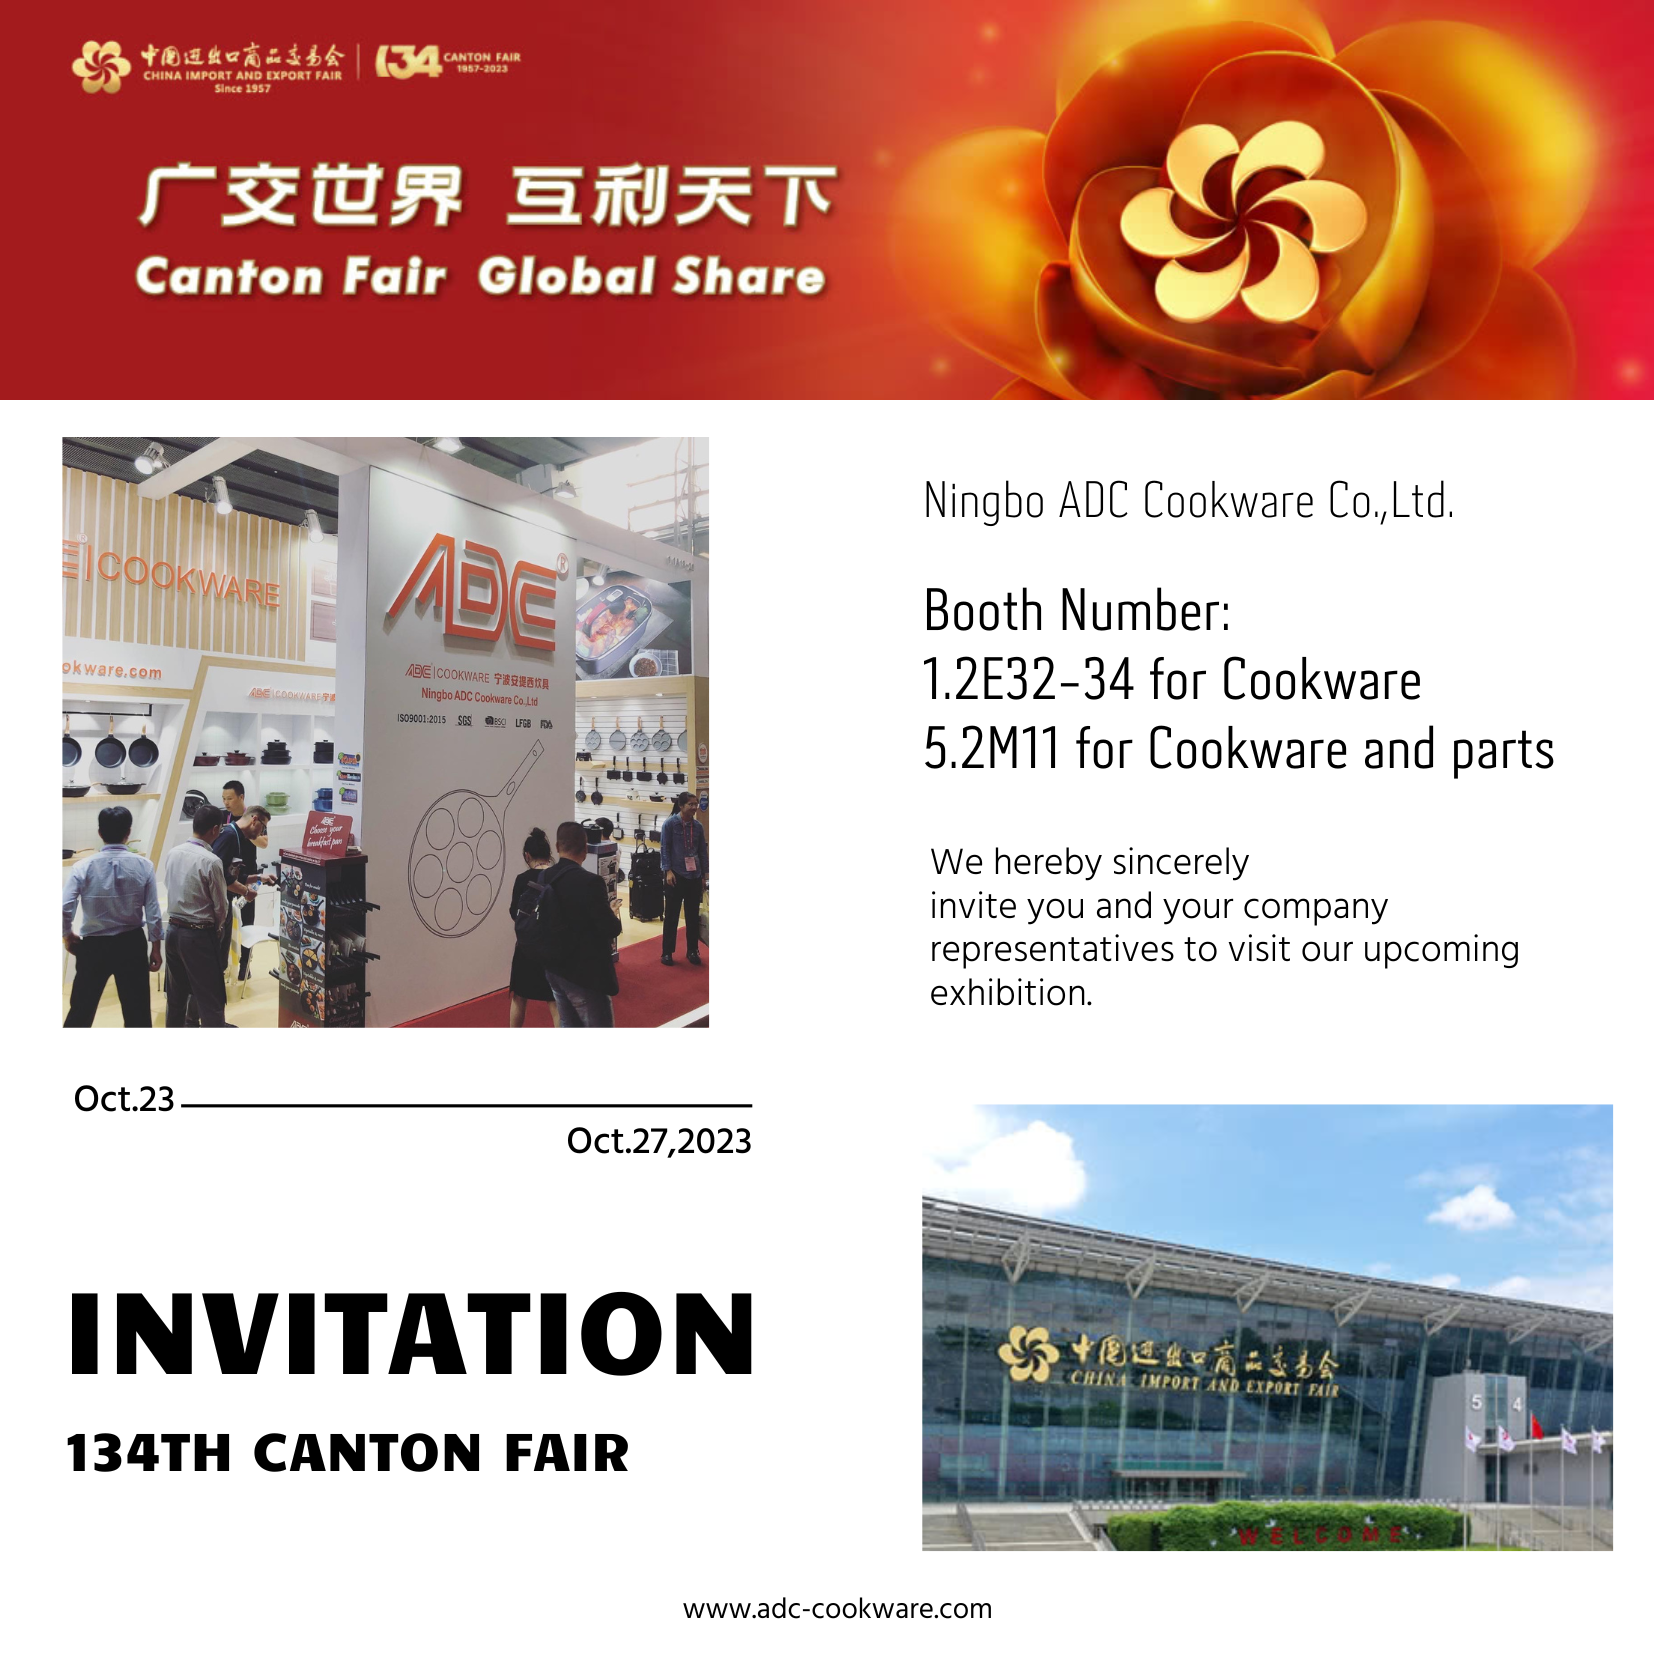 Ningbo ADC Cookware Extends a Cordial Invitation to the 134th Canton Fair